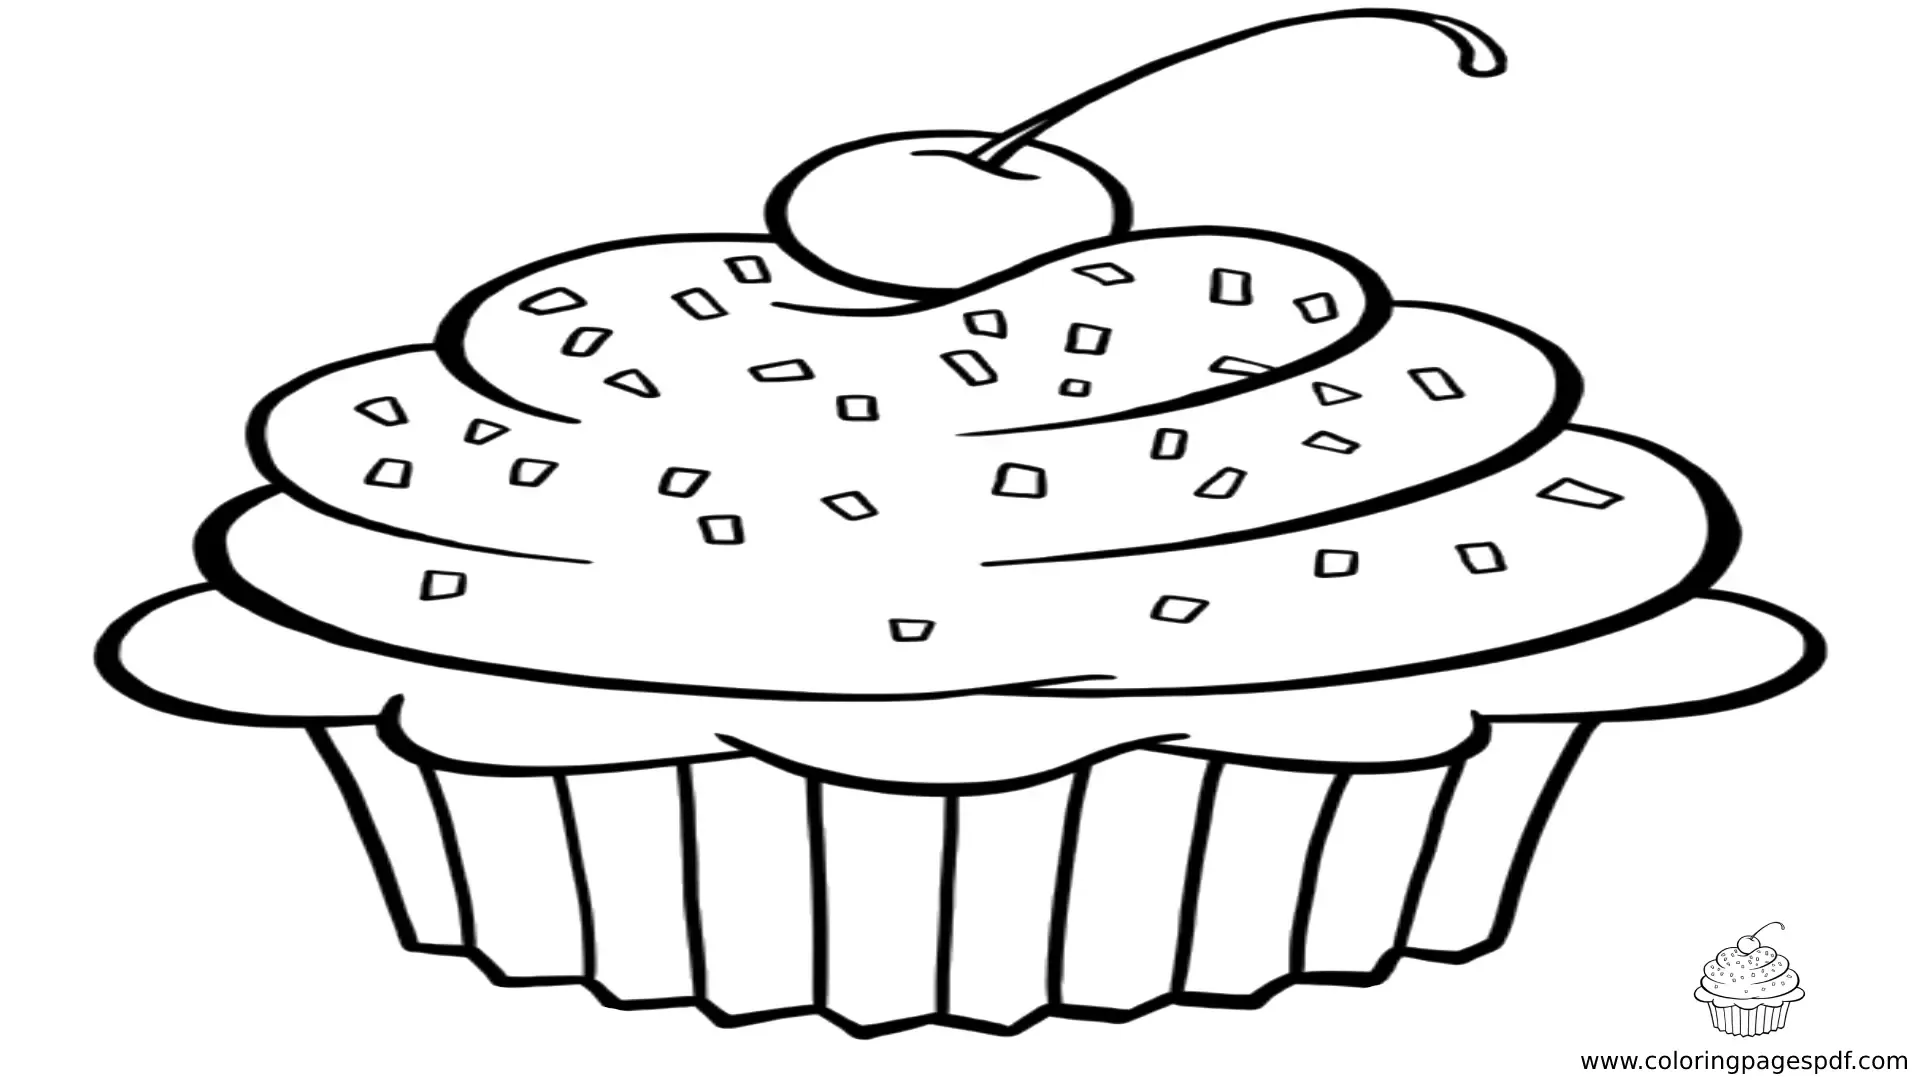 Printable Cupcake Pictures